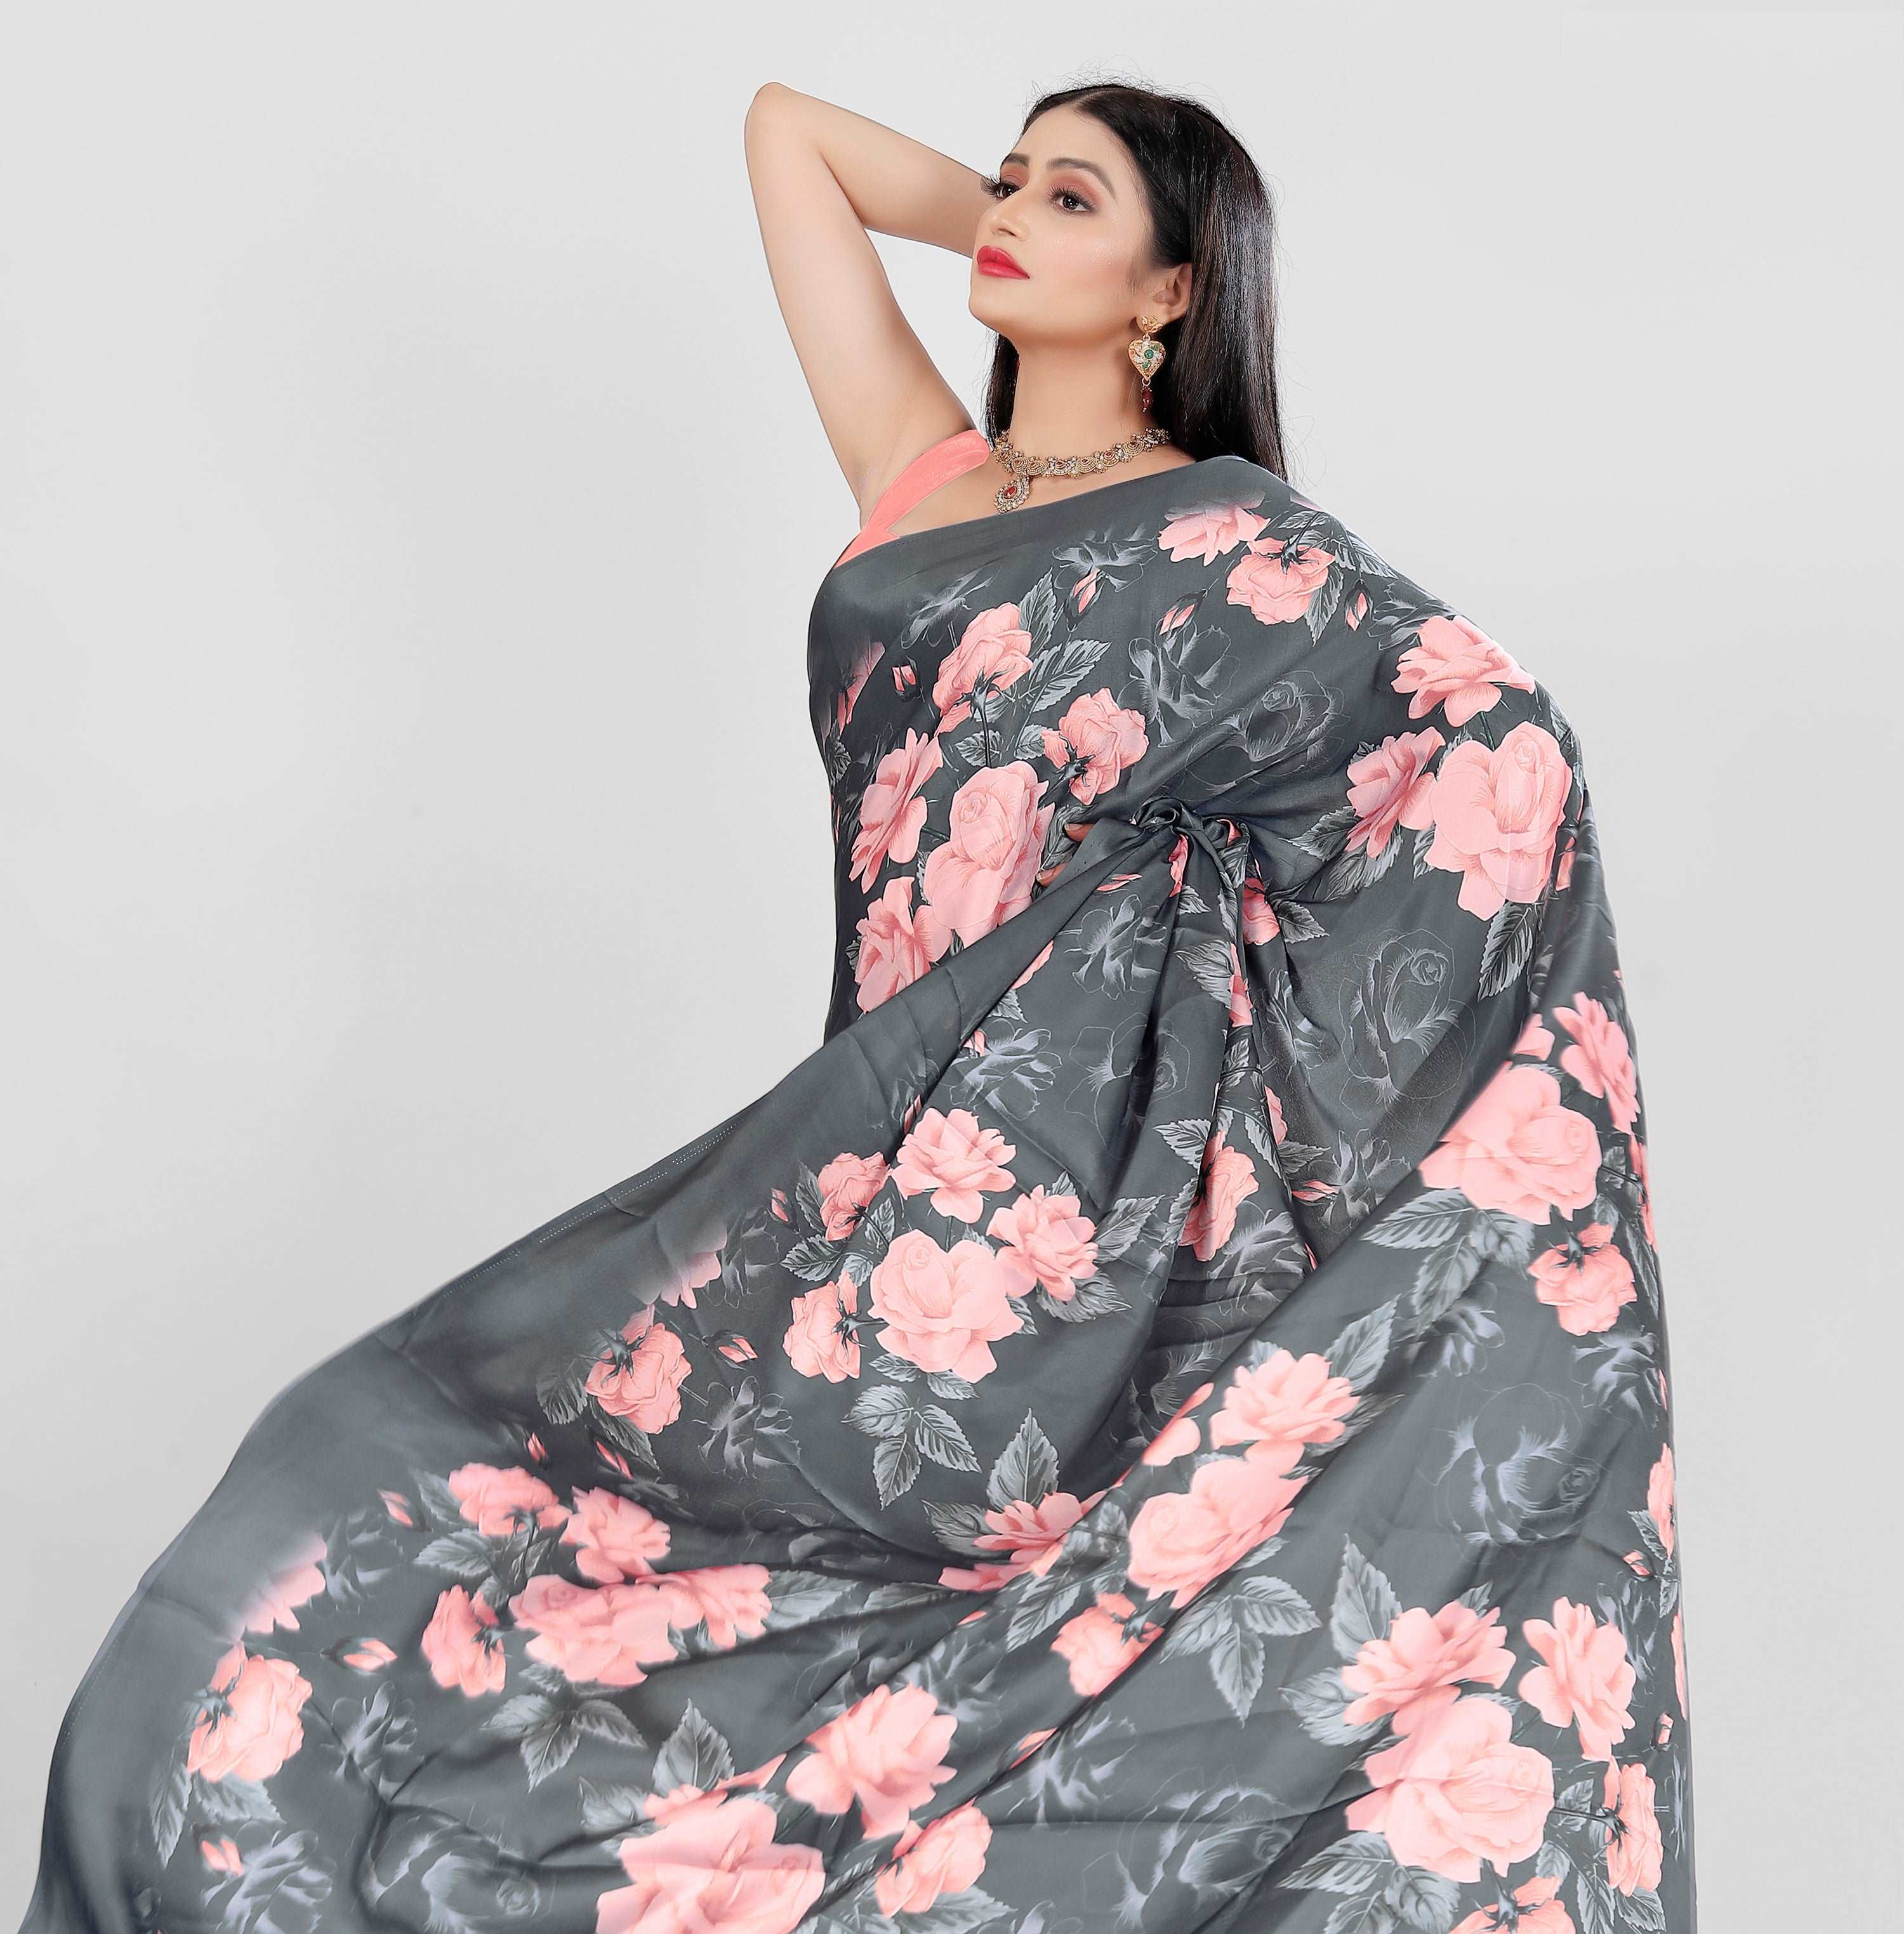 Black and Pink Color Japan Satin Saree -Adhyay  Collection YF#20177